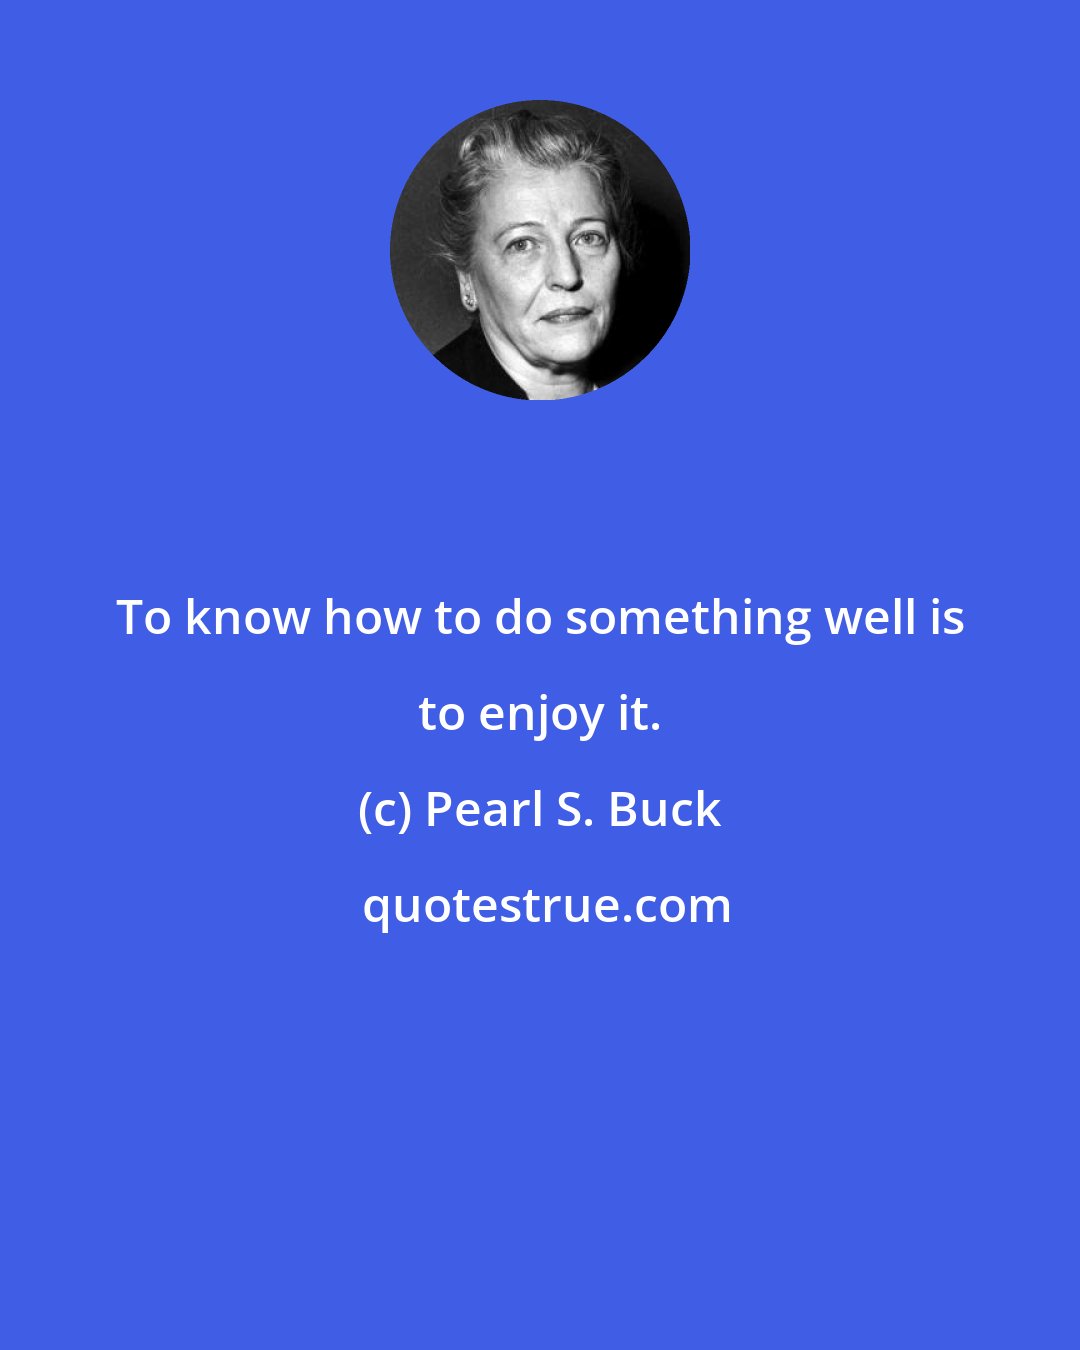 Pearl S. Buck: To know how to do something well is to enjoy it.